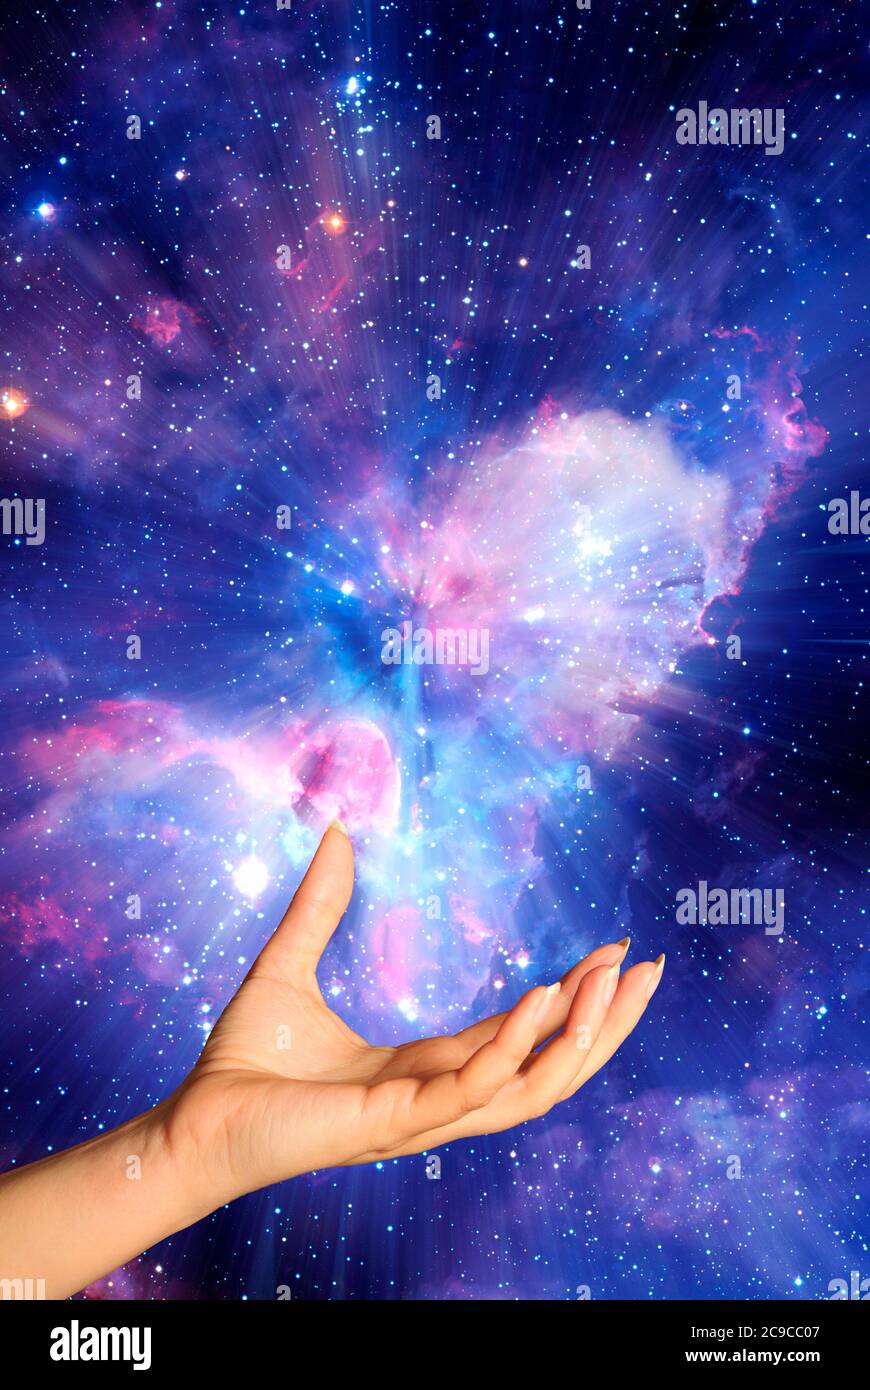 open woman hand in a gesture of acceptance with space and stars background Stock Photo